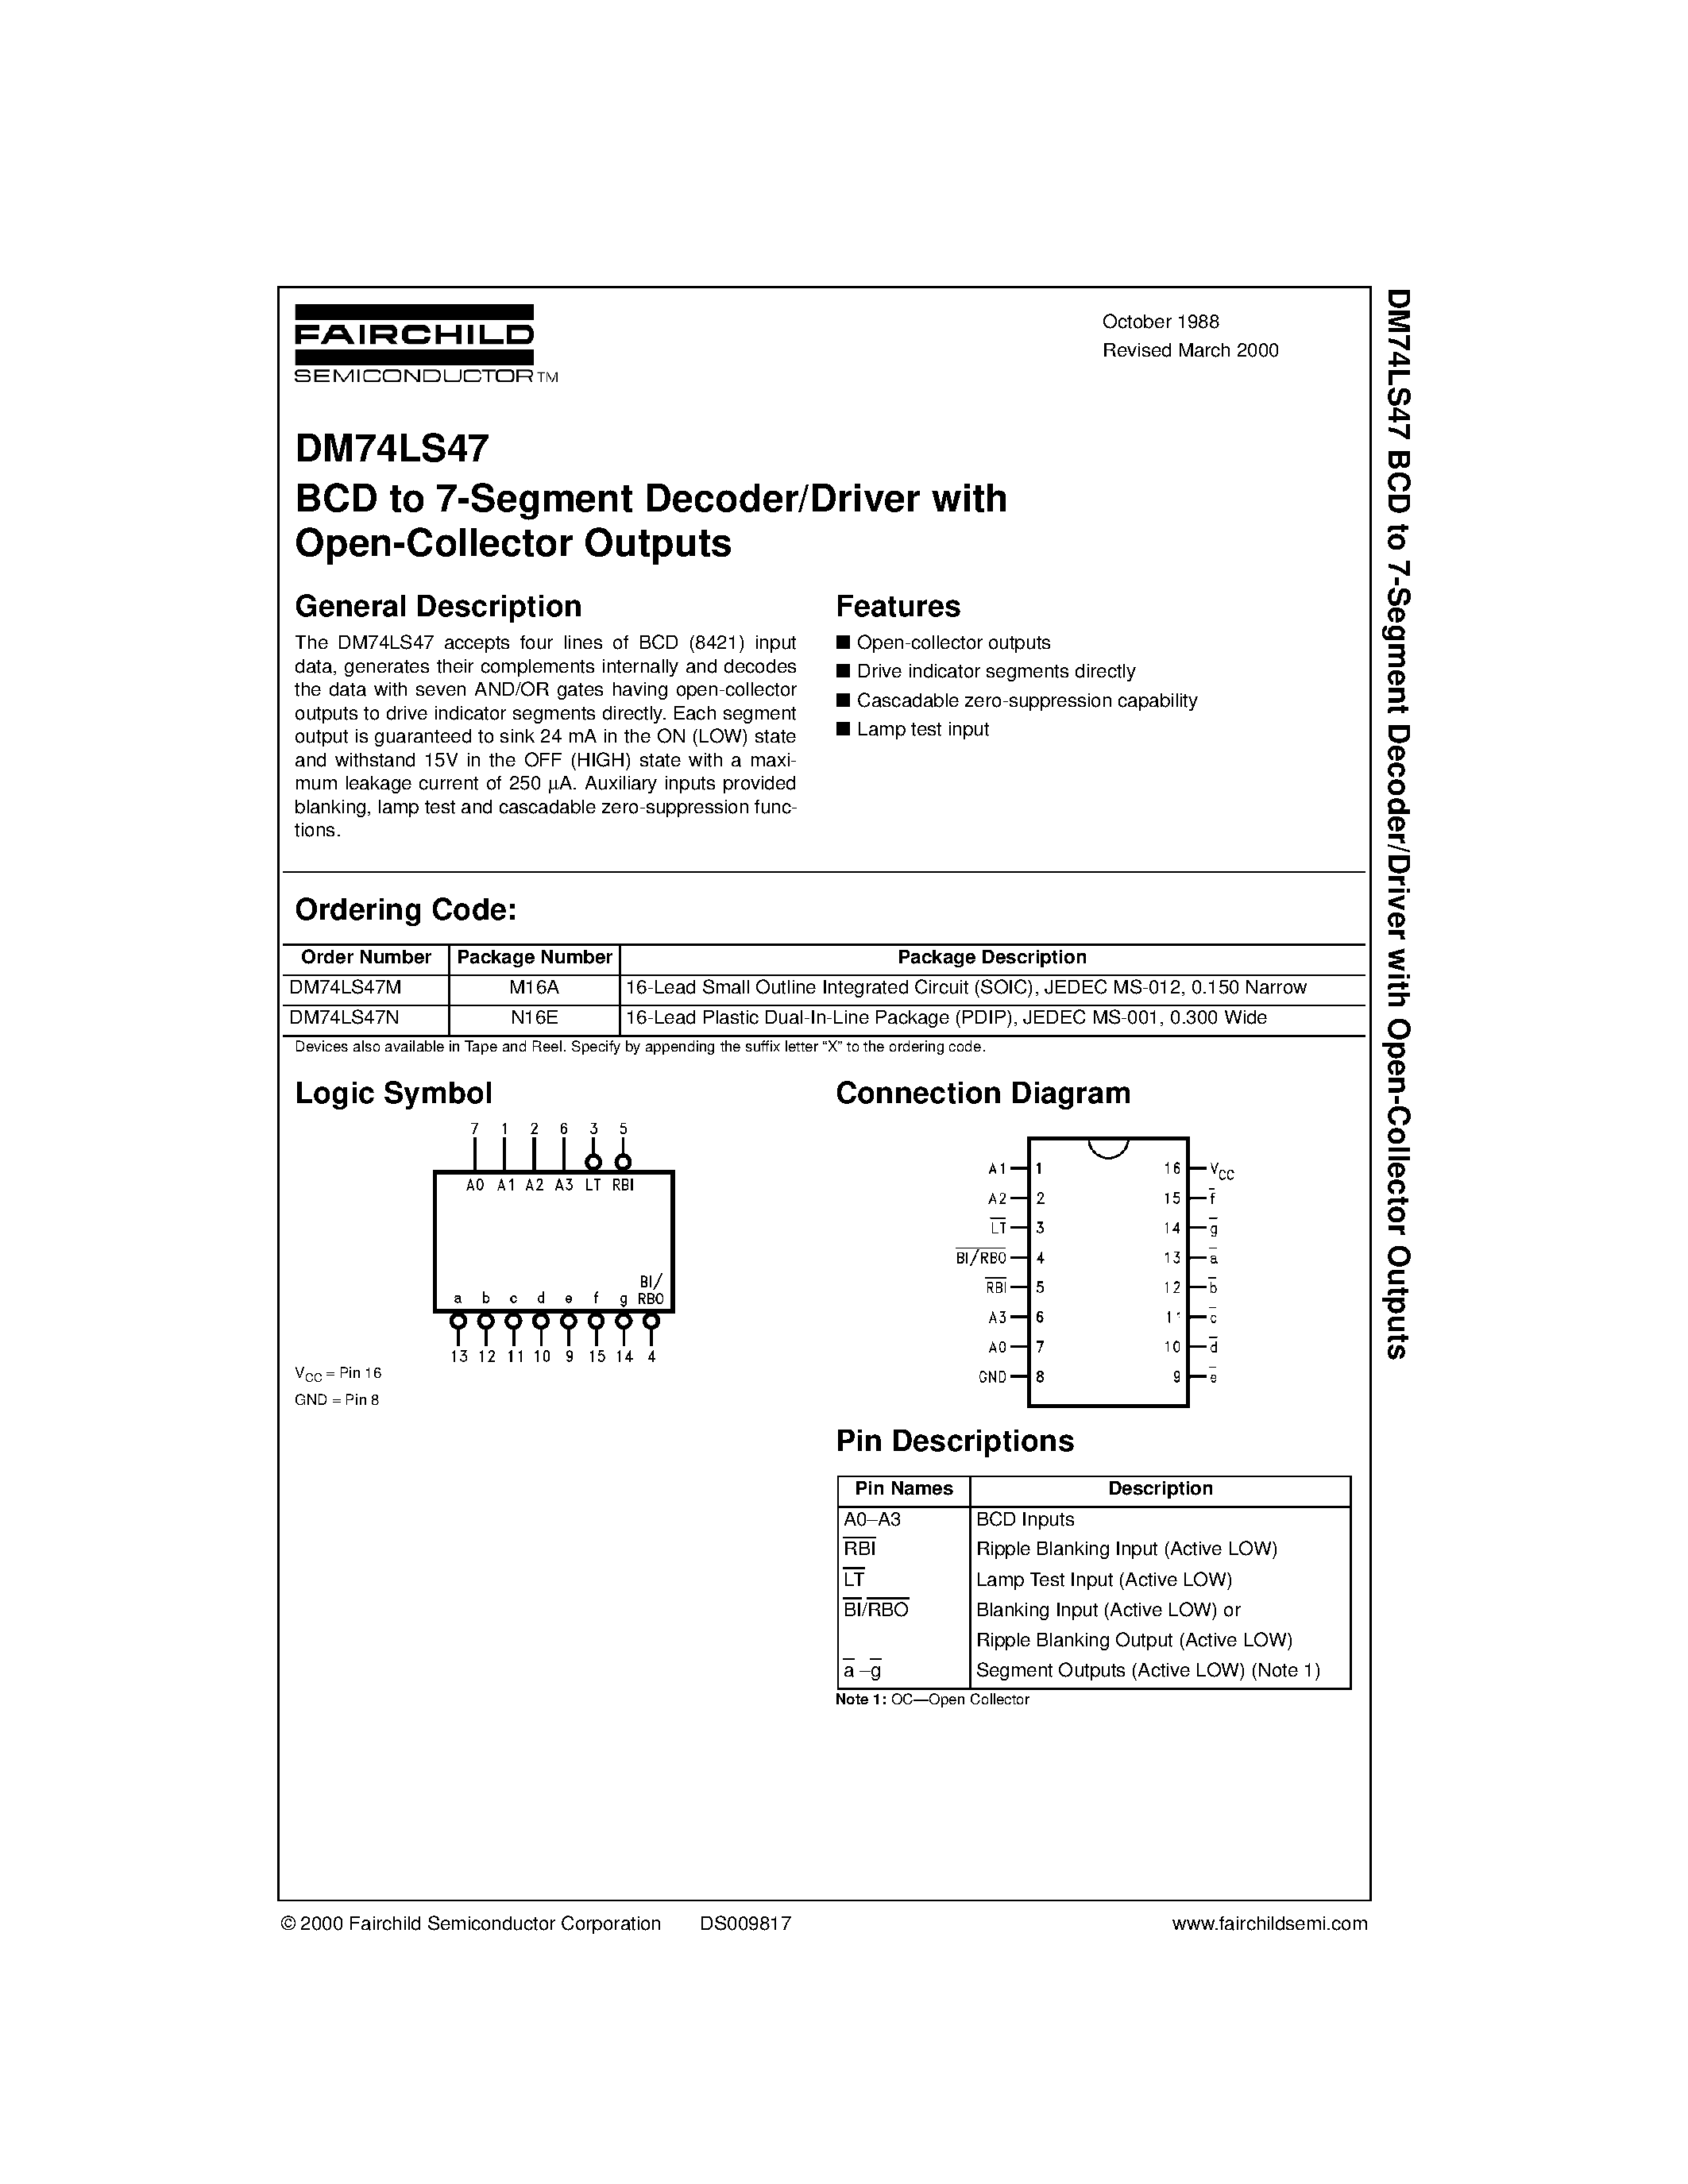 Datasheet DM74LS47 - BCD to 7-Segment Decoder/Driver with Open-Collector Outputs page 1